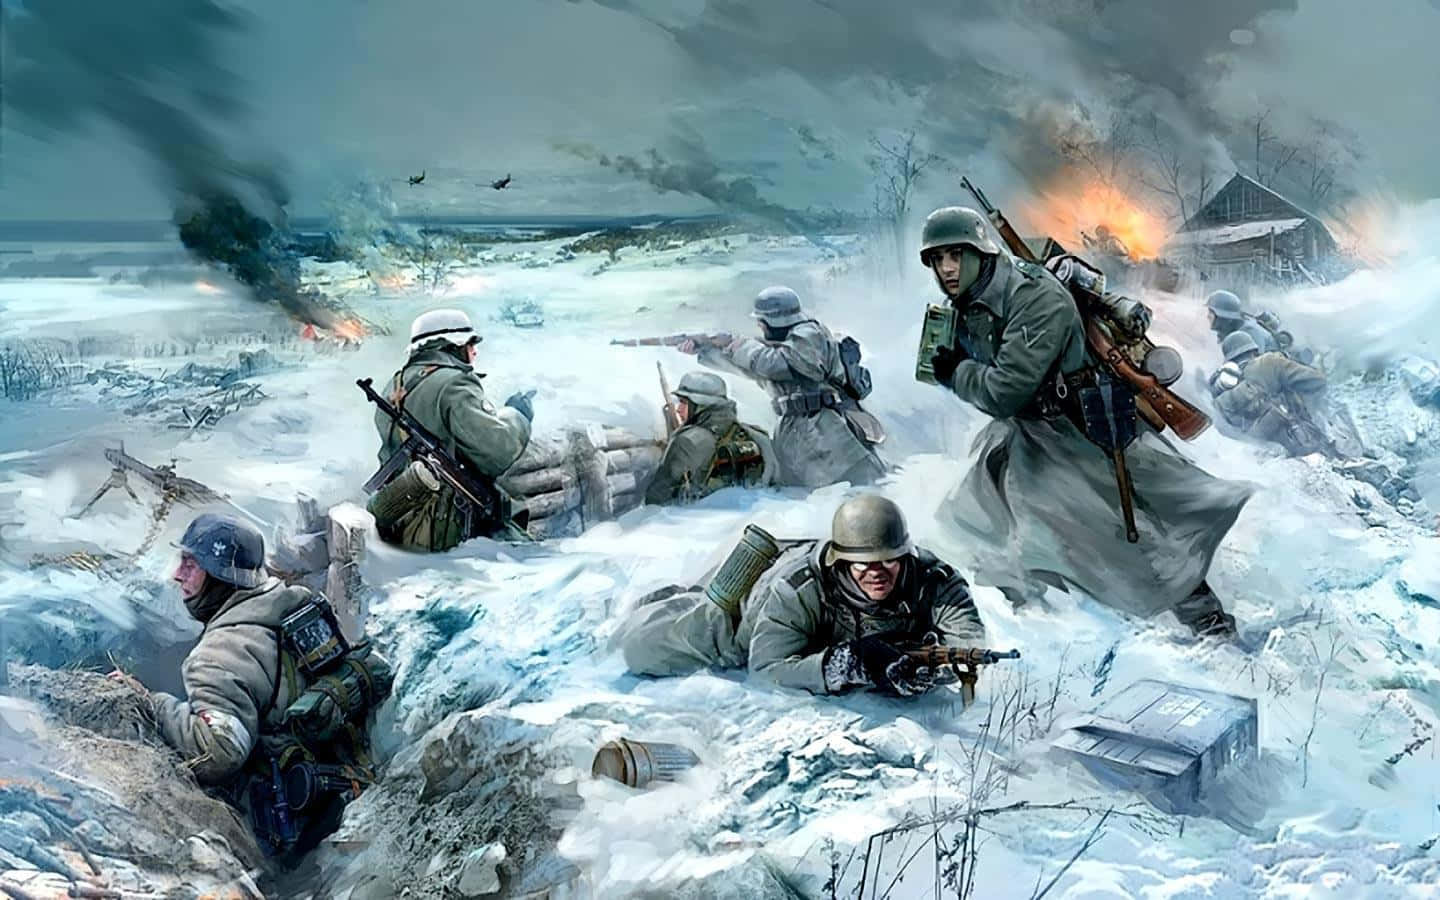 A Painting Of Soldiers In The Snow